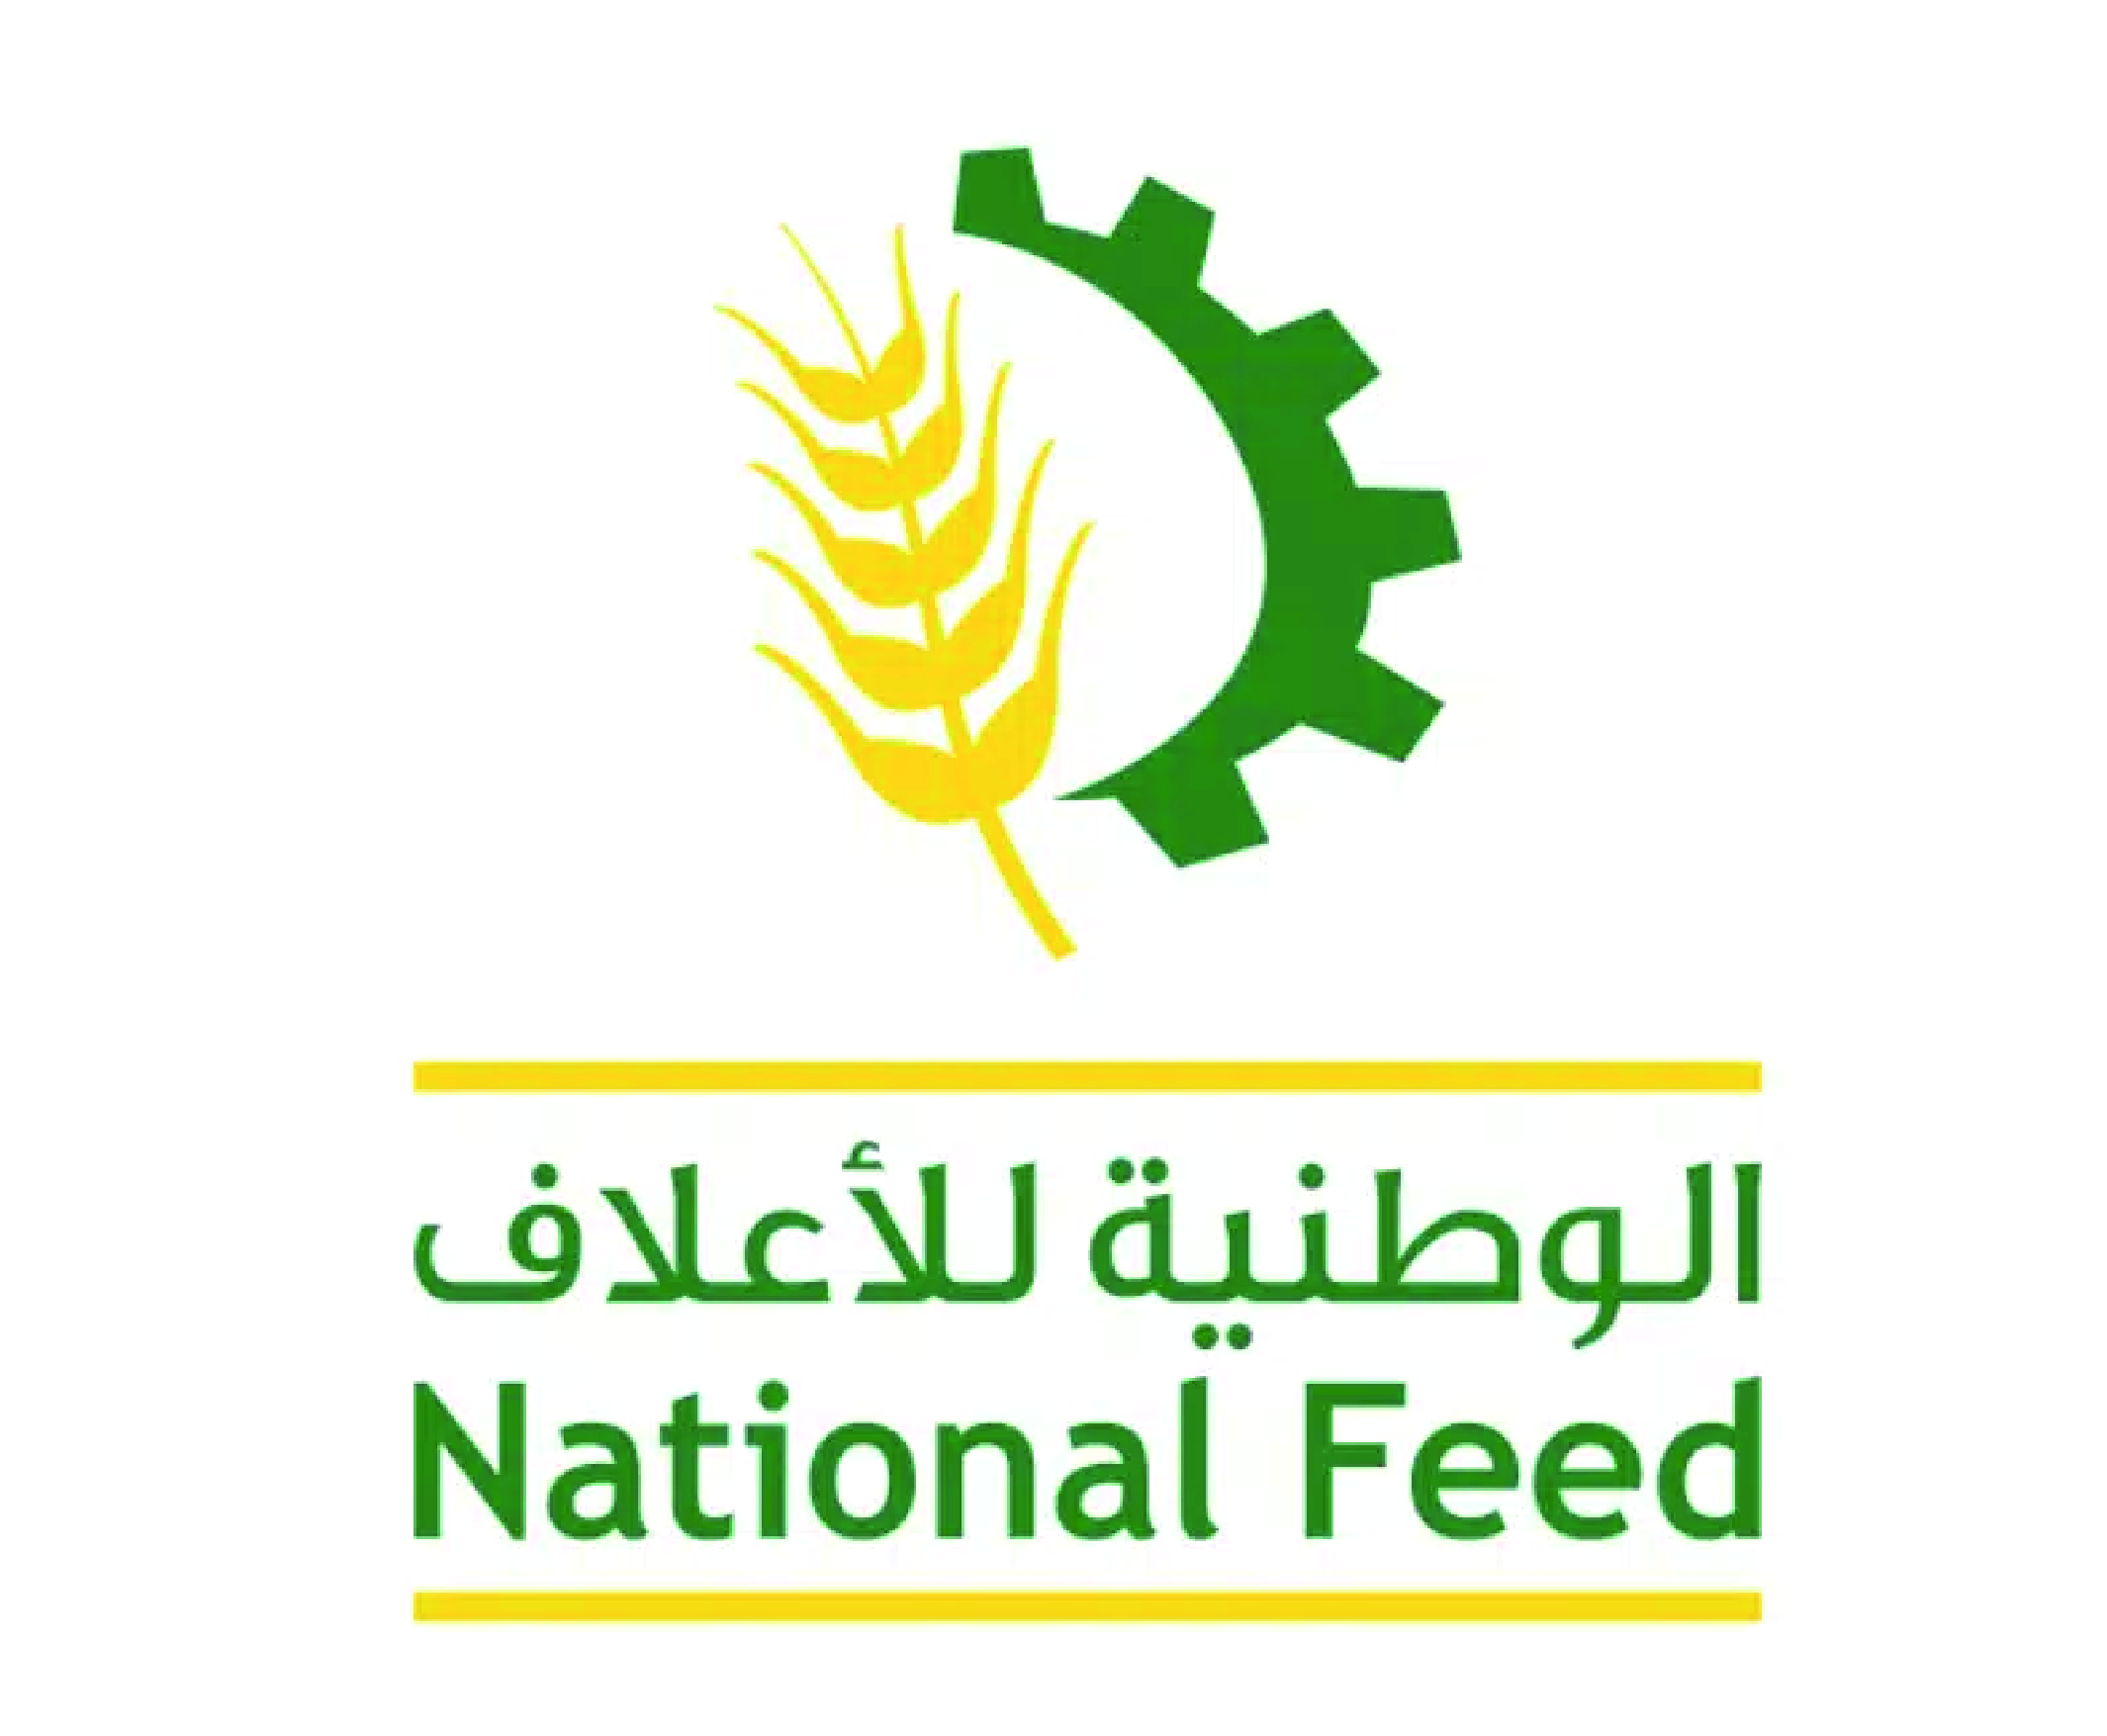 National feed